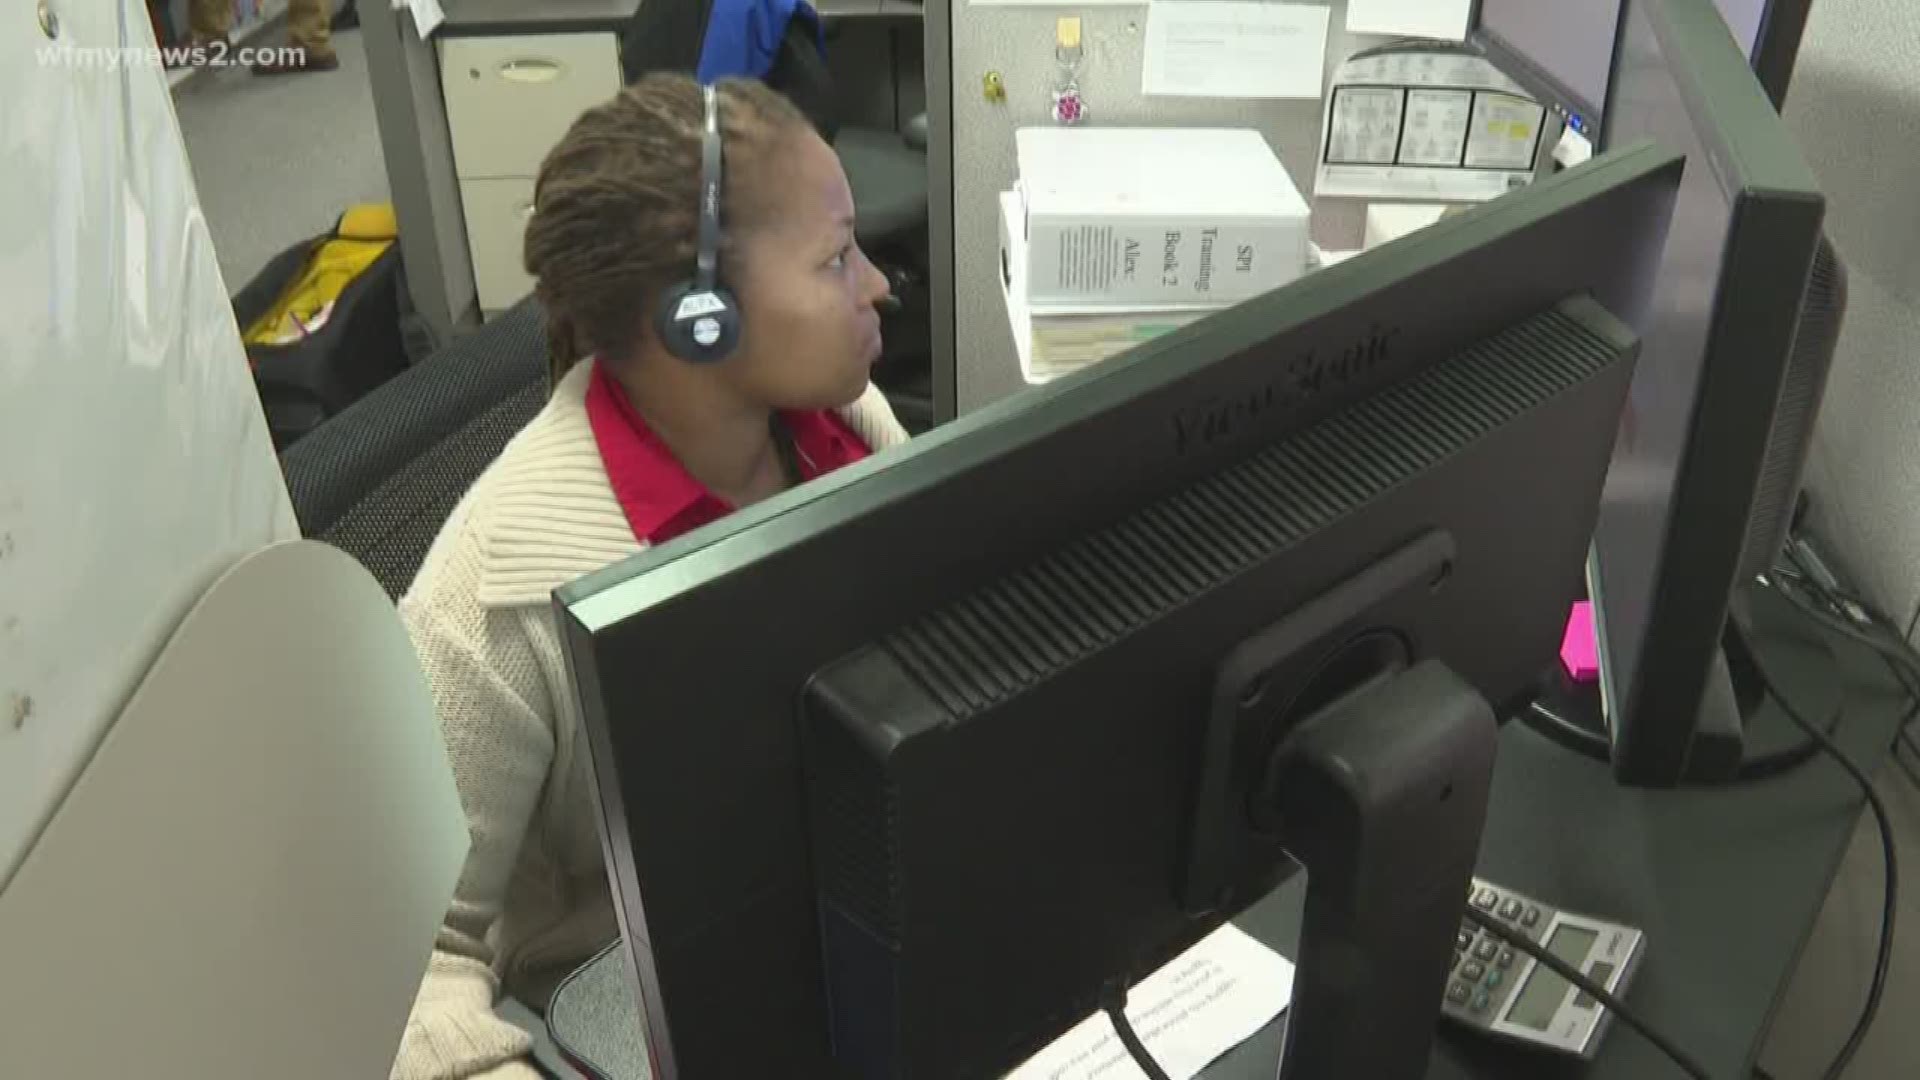 North Carolina is among the first in the country to activate a coronavirus helpline to answer questions and concerns.